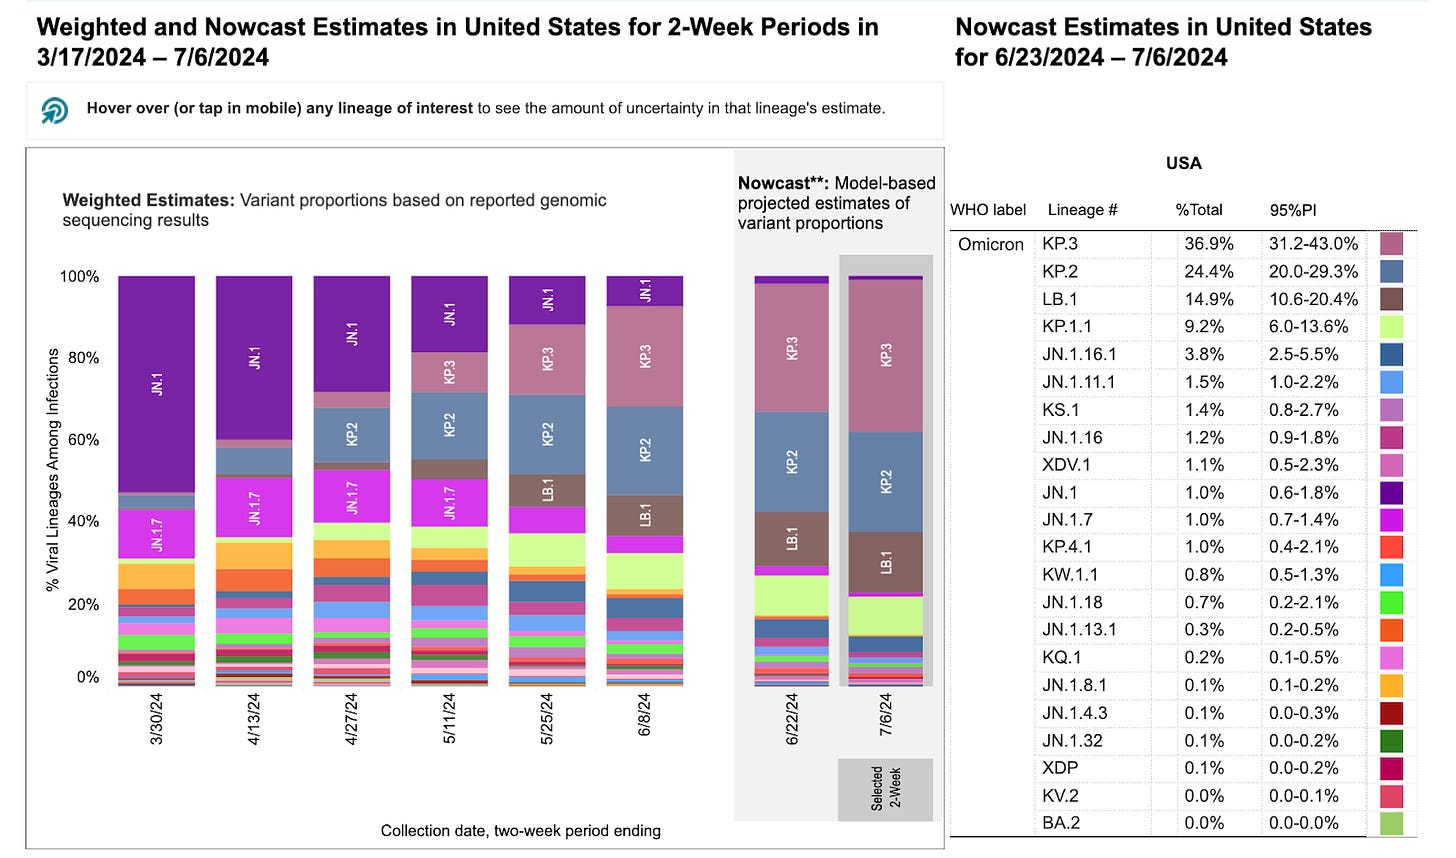 Two stacked bar charts with two-week periods for sample collection dates on the horizontal x-axis and percentage of viral lineages among infections on the vertical y-axis. Title of the first bar chart reads “Weighted Estimates: Variant proportions based on reported genomic sequencing results” with collection dates ranging from 3/30/2024 to 6/8/2024. The second chart’s title reads “Nowcast: model-based projected estimates of variant proportions,” dates ranging from 6/22/24 to 7/6/2024. In the Nowcast Estimates for the period ending on 7/6/24, KP.3 (mauve) is predicted to remain the dominant strain at 25.9%. JN.1 (dark purple) is projected to decrease to 1 percent, while KP.2 (blue) grows to  24.4 percent. Other variants are at smaller percentages represented by a handful of other colors as small slivers.The legend with a list of variants, proportions, and their associated colors is on the far right of the bar charts.